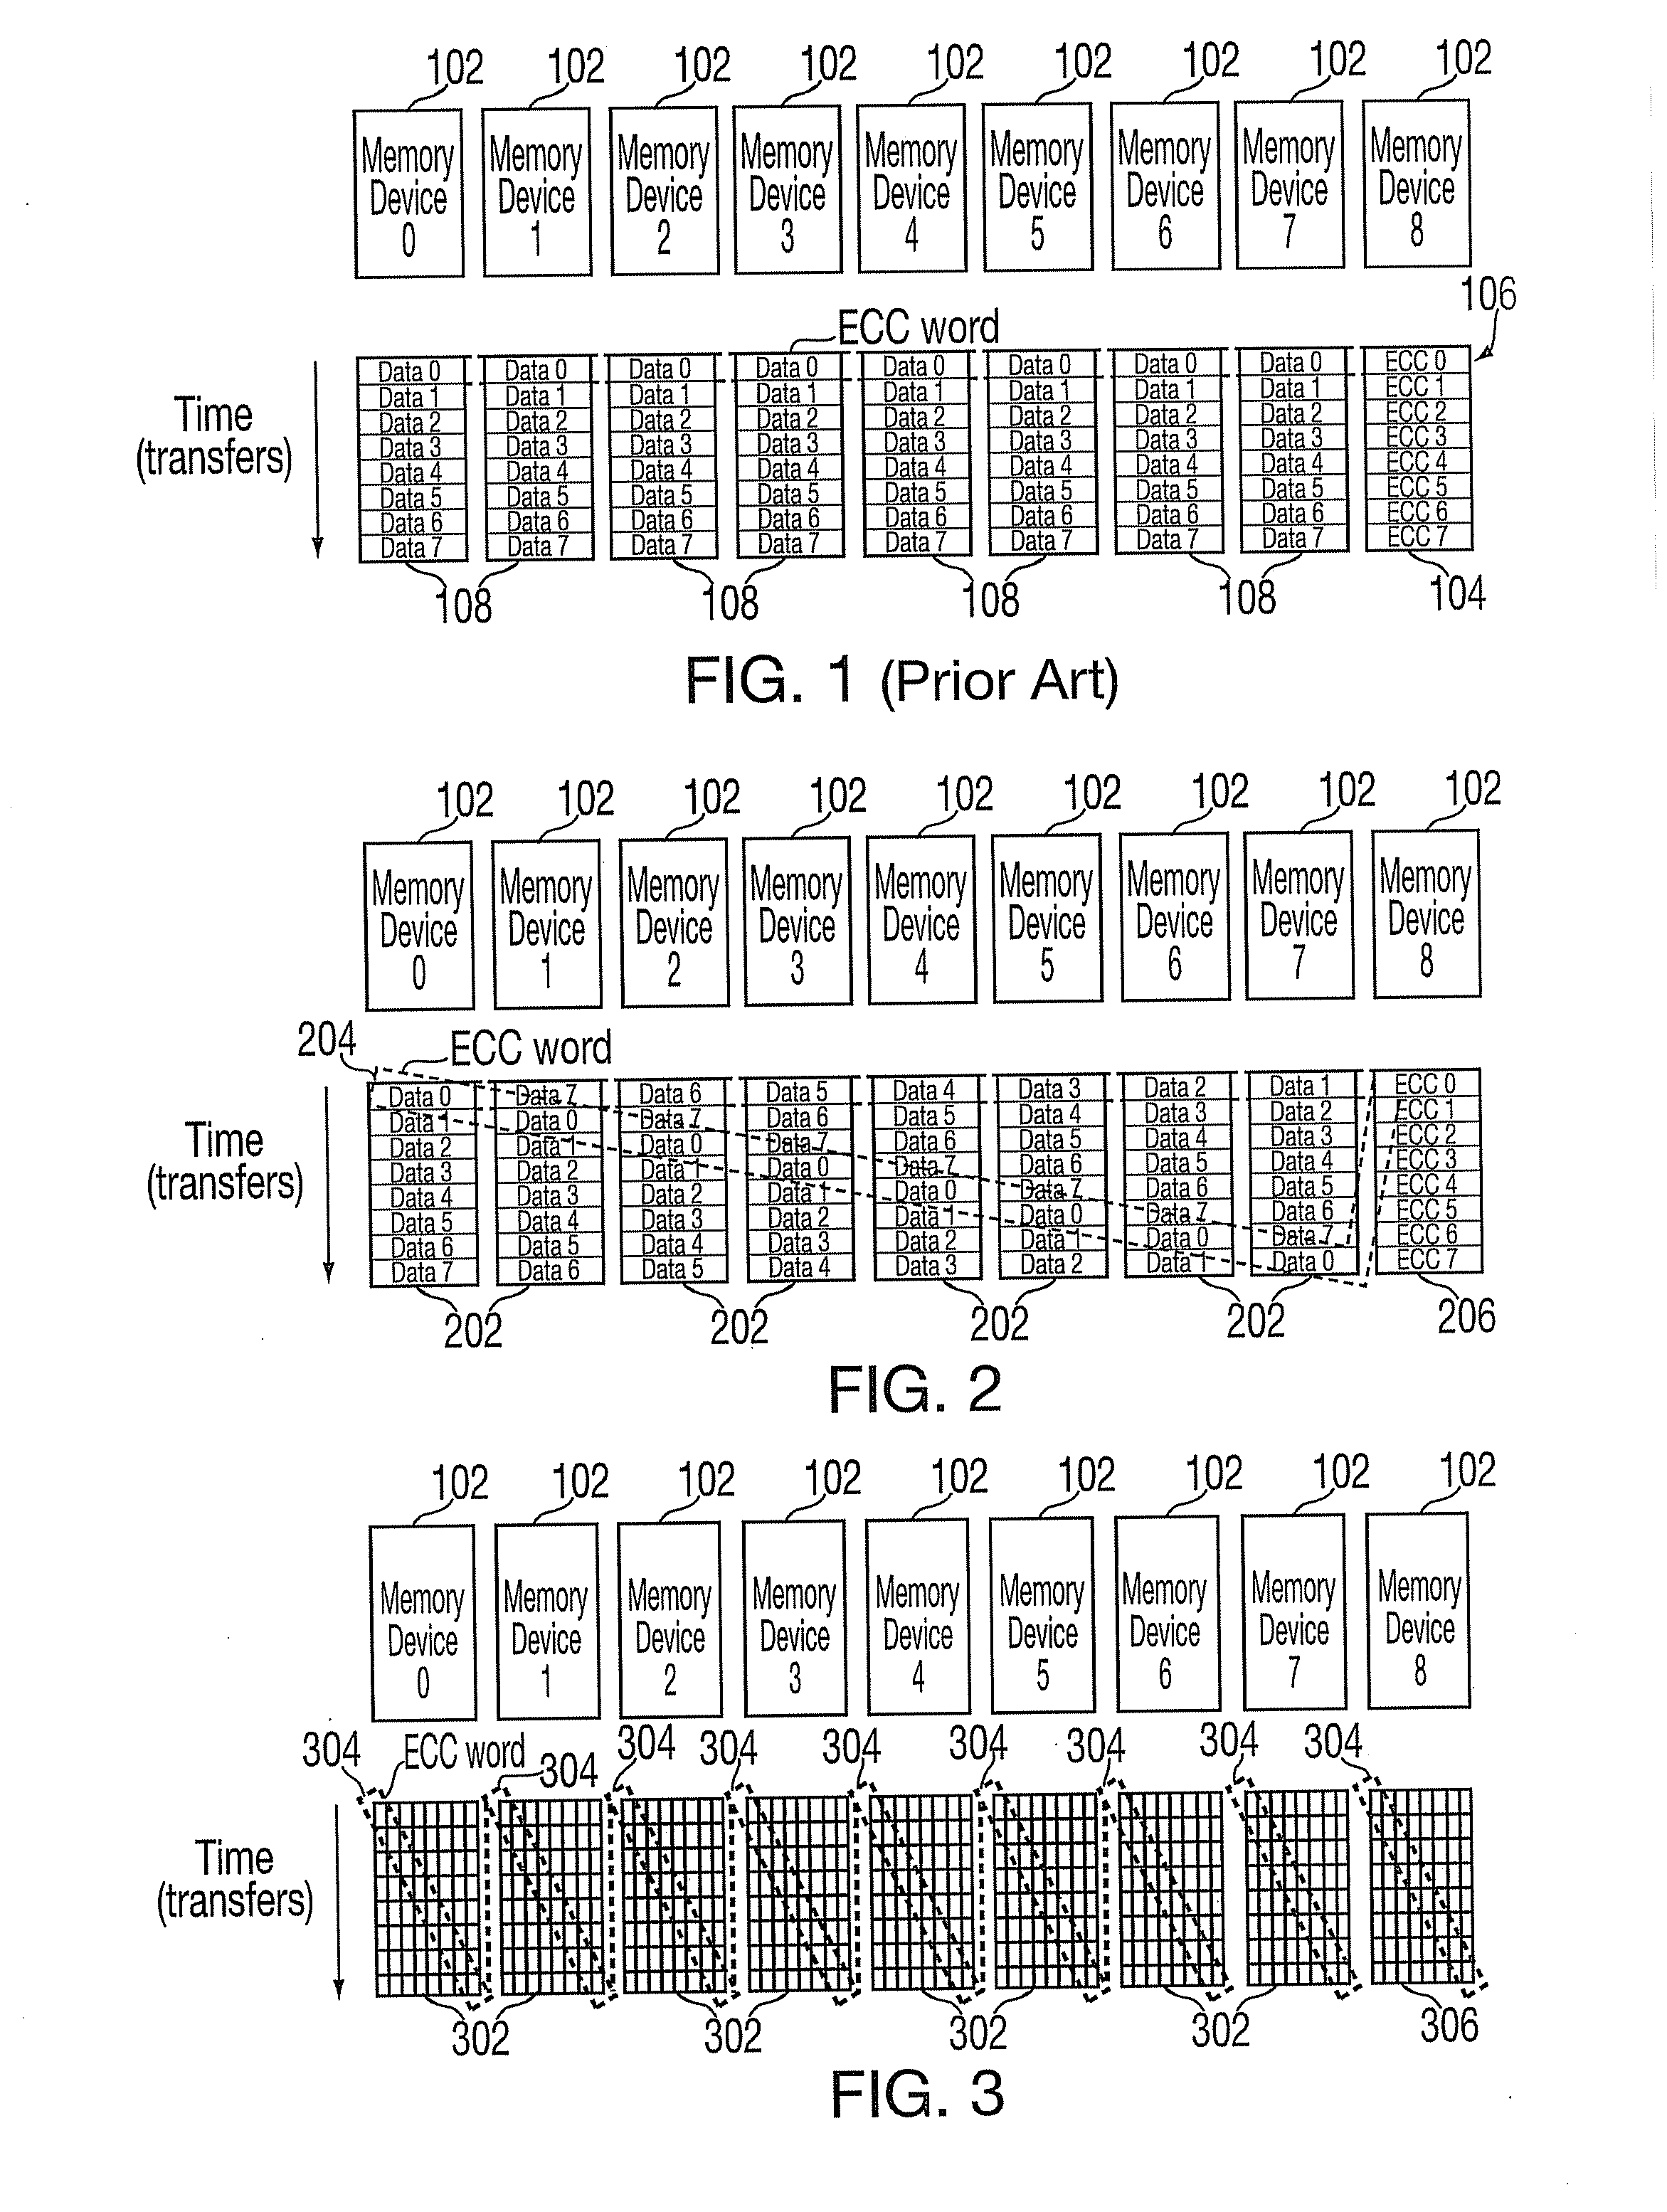 System and method for providing error correction and detection in a memory system